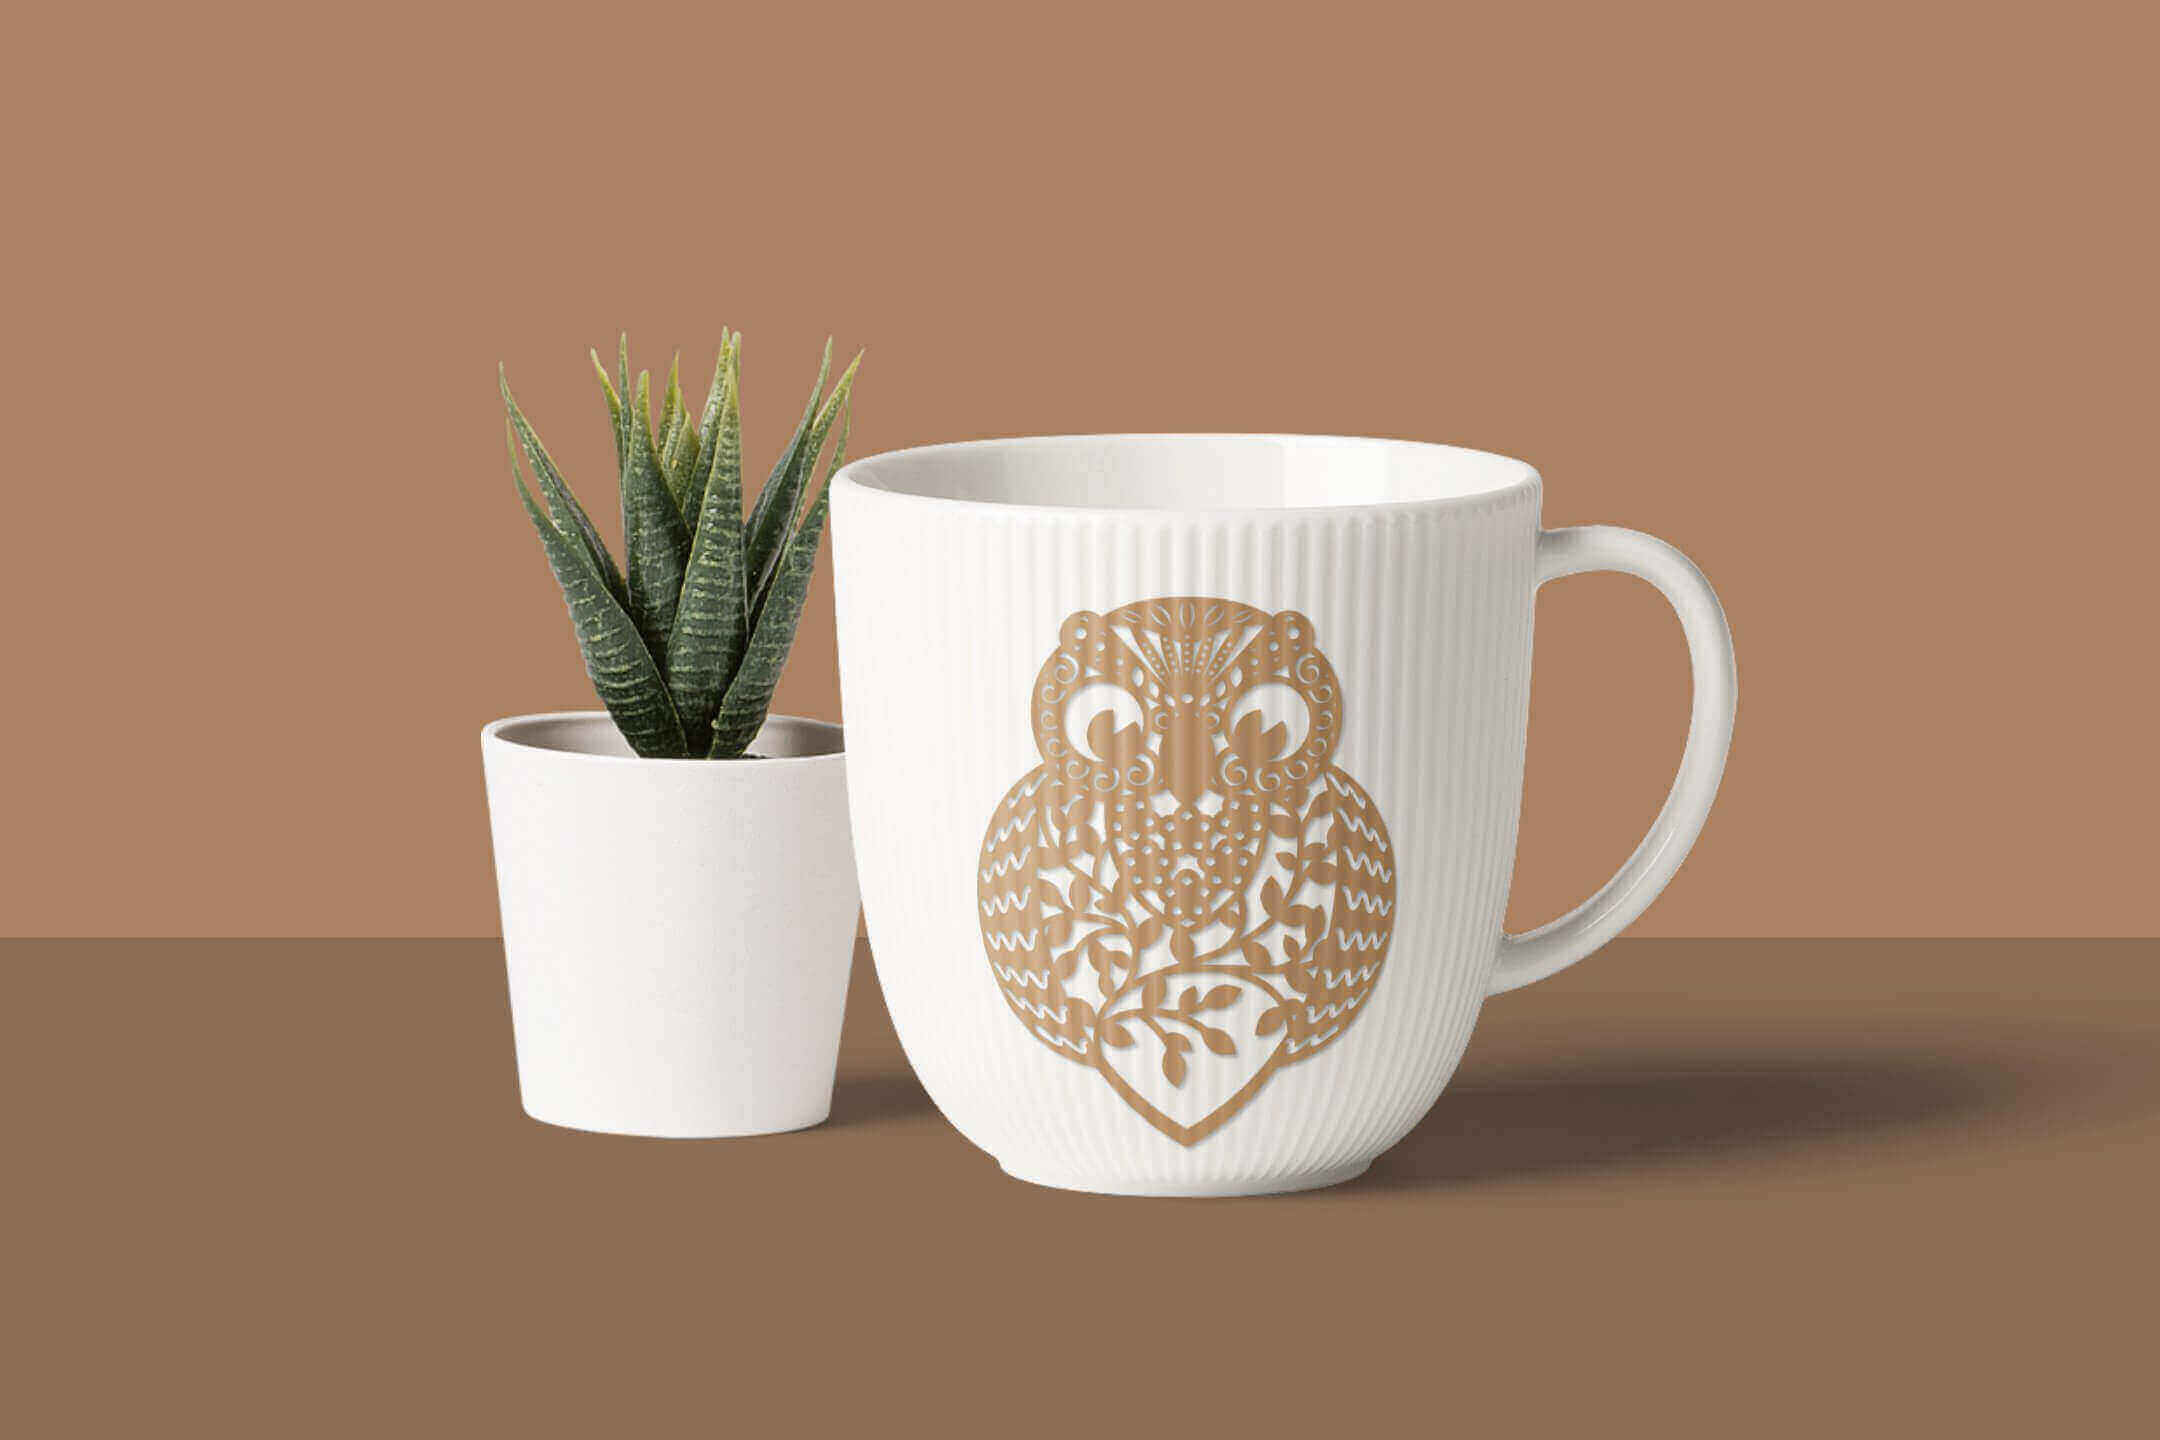 Paper Cut Design Owl on the Cup.